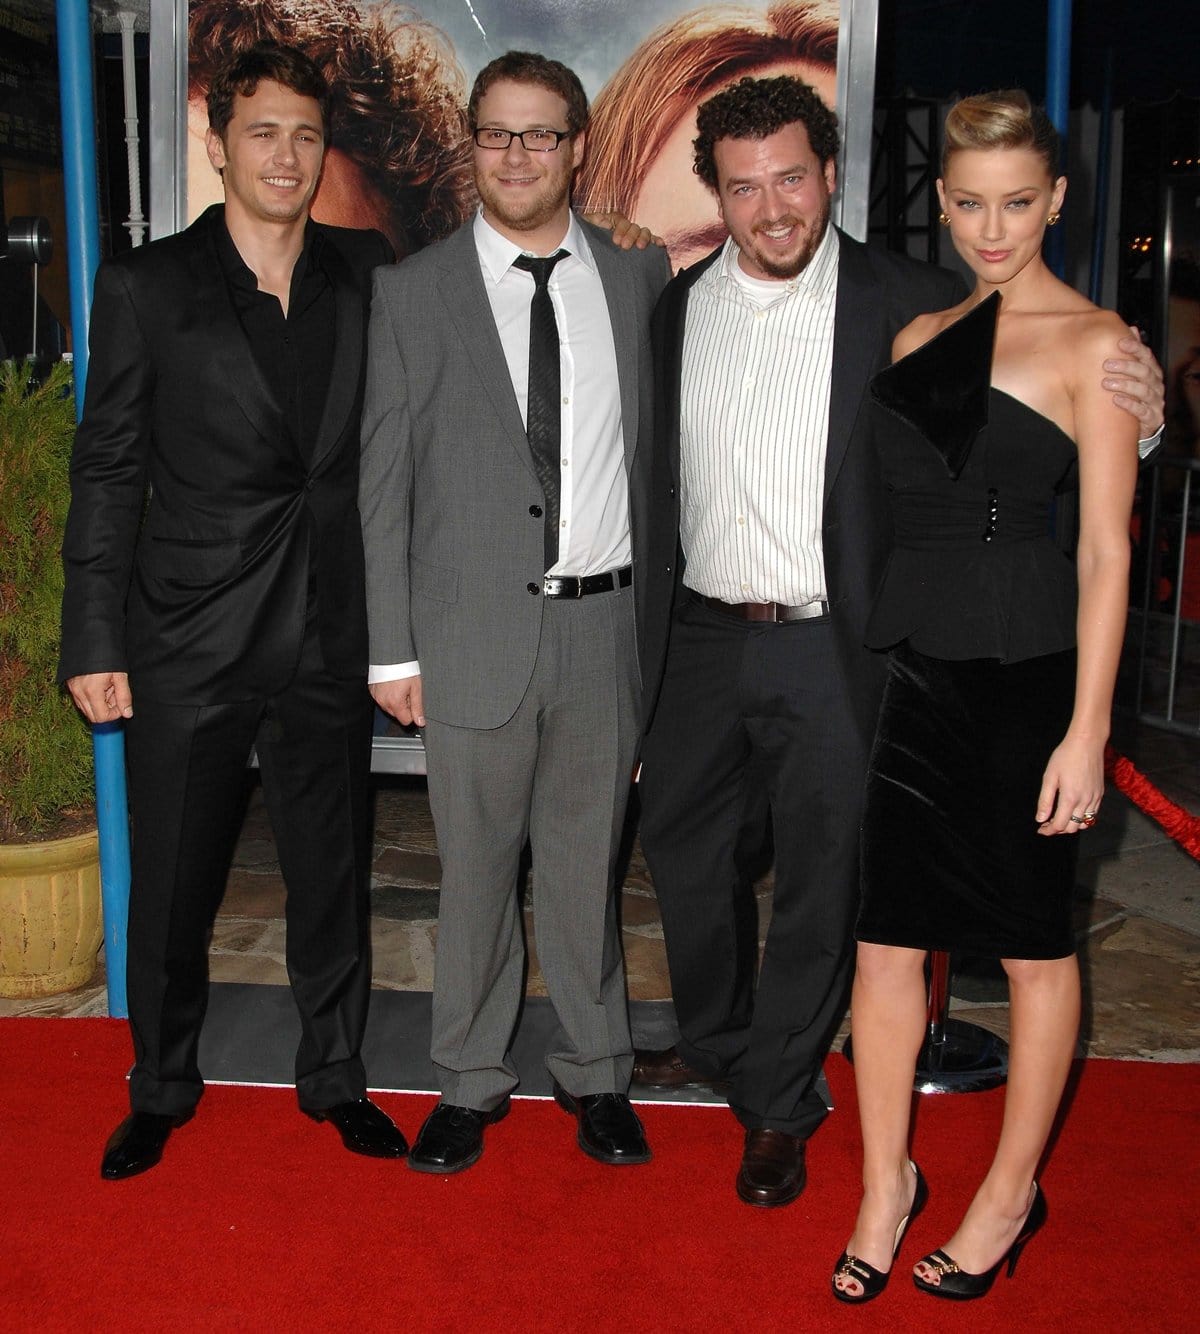 James Franco, Seth Rogen, Danny McBride, and Amber Heard attend the "Pineapple Express" Los Angeles Premiere